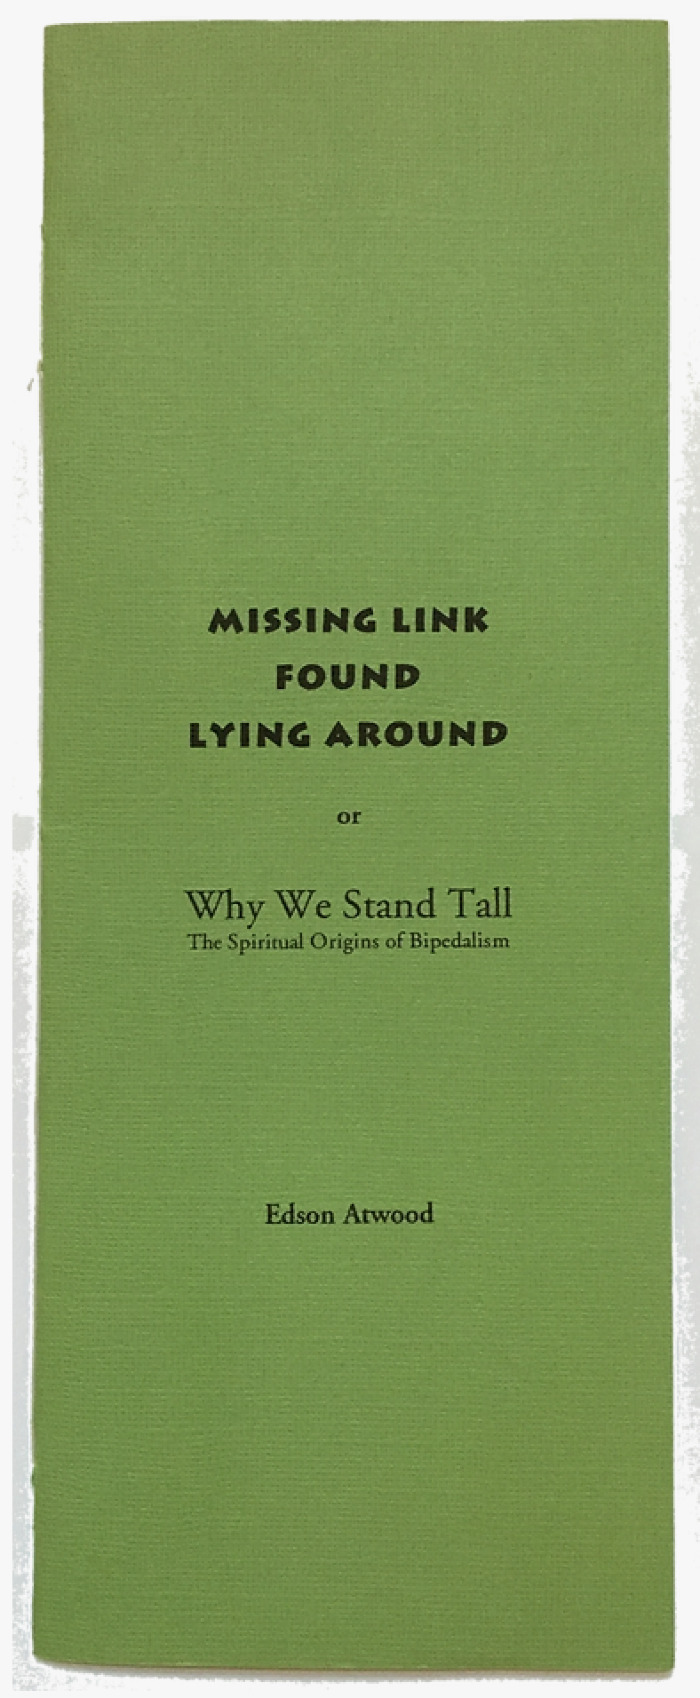 Missing Link Found Lying Around: or Why We Stand Tall, The Spiritual Origins of Bipedalism / Edson Atwood